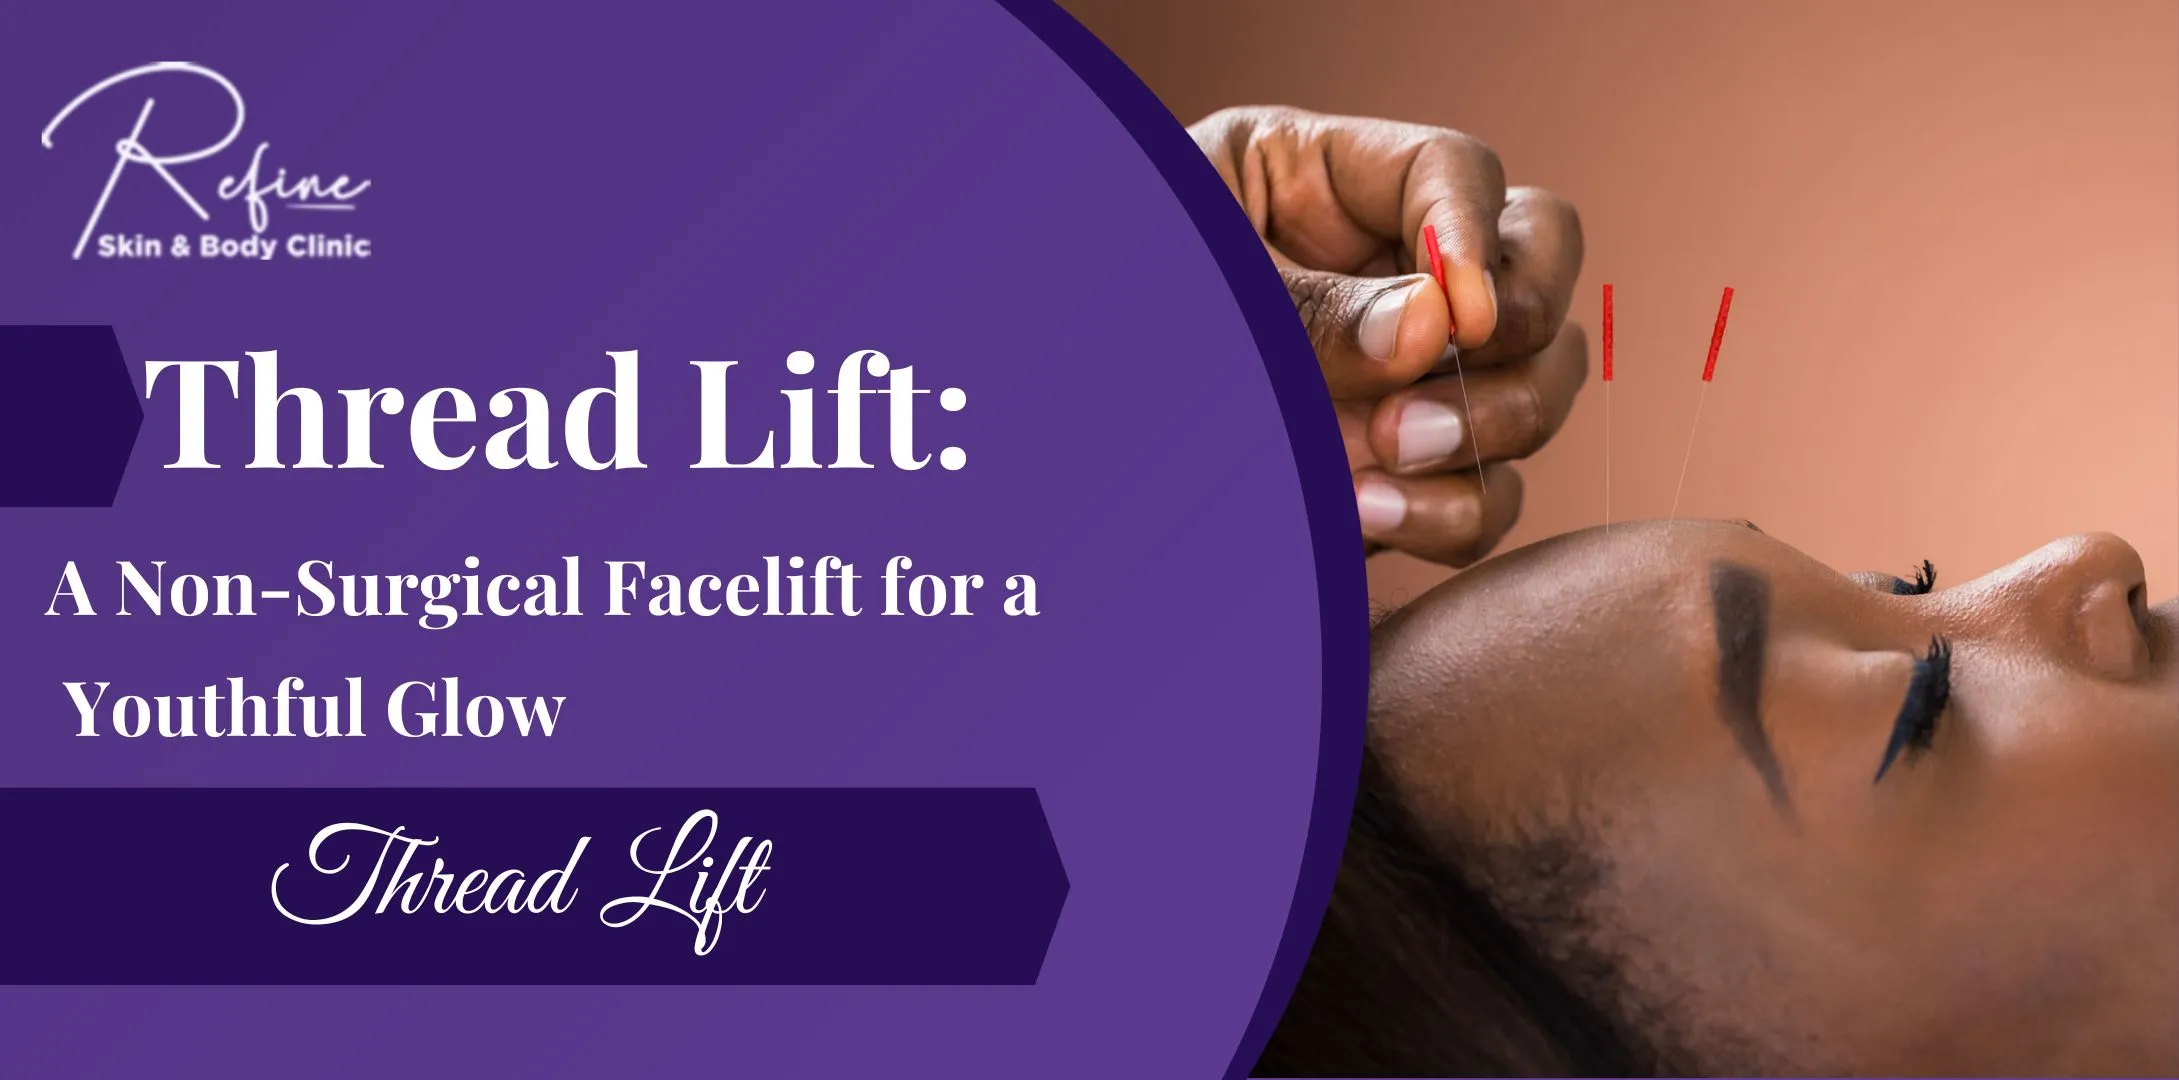 Thread Lift: A Non-Surgical Facelift for a Youthful Glow